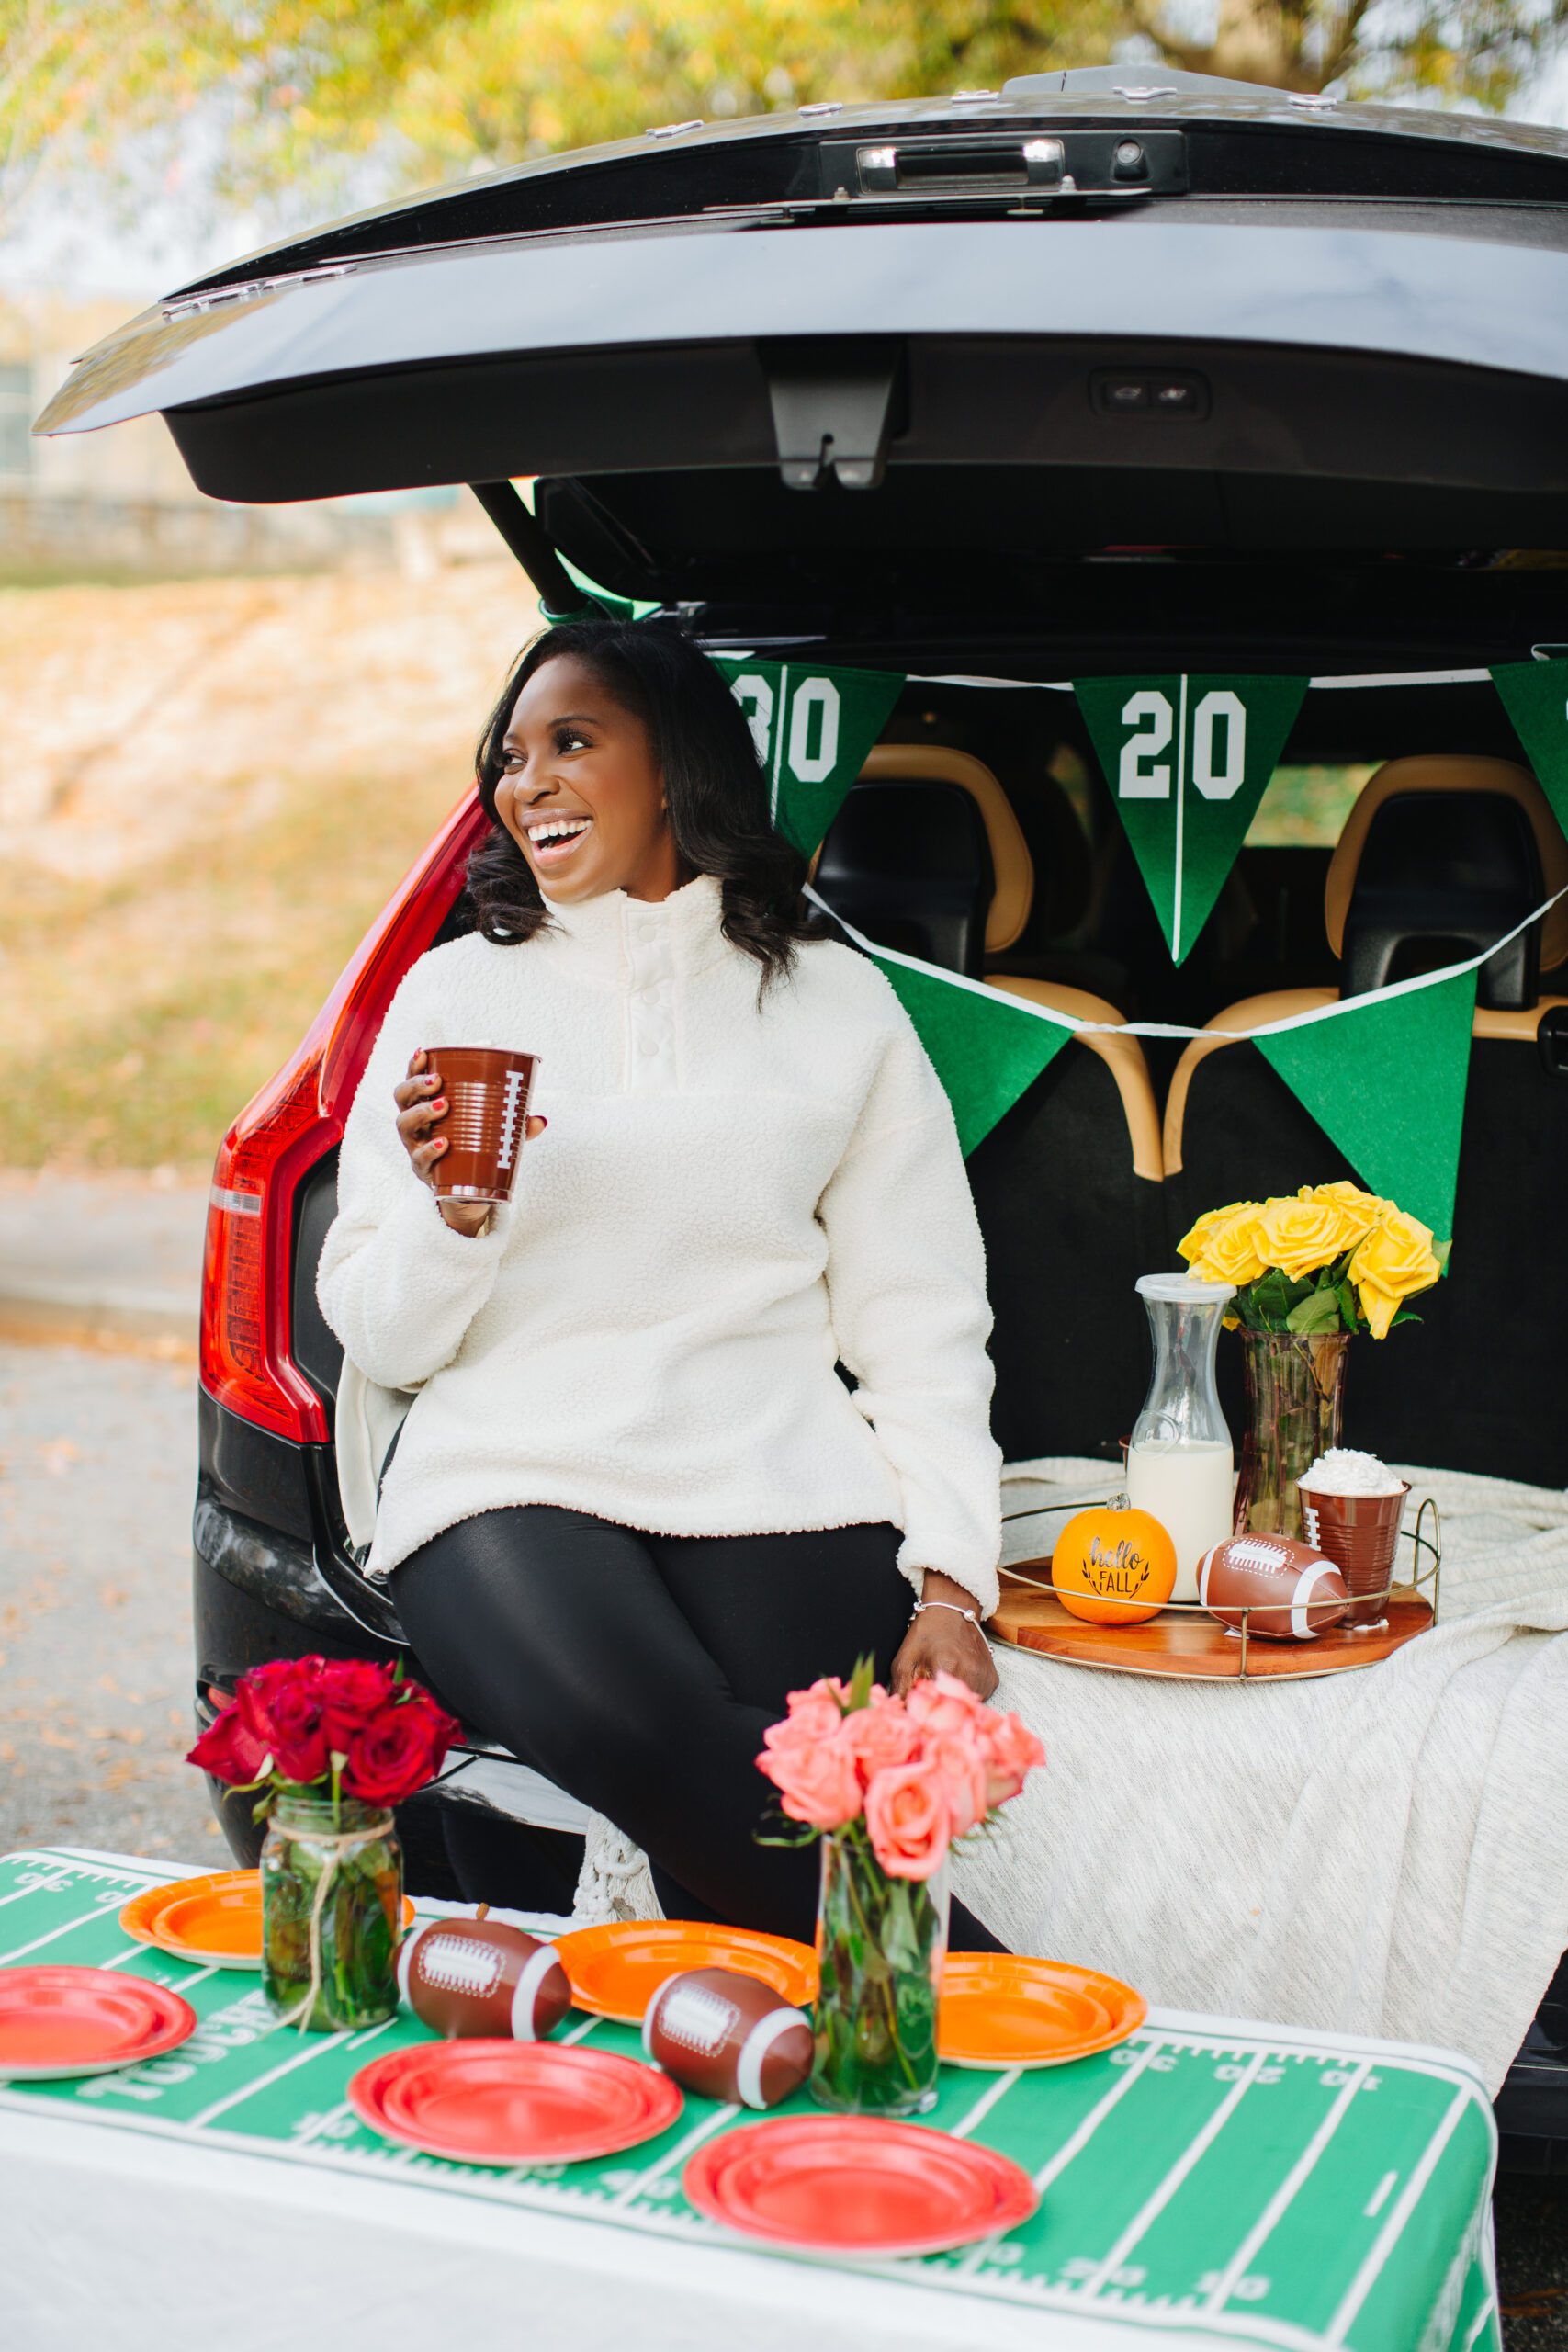 Looking to tailgate this year at your favorite sporting event? CLICK HERE for some awesome tips to tailgate like a pro!